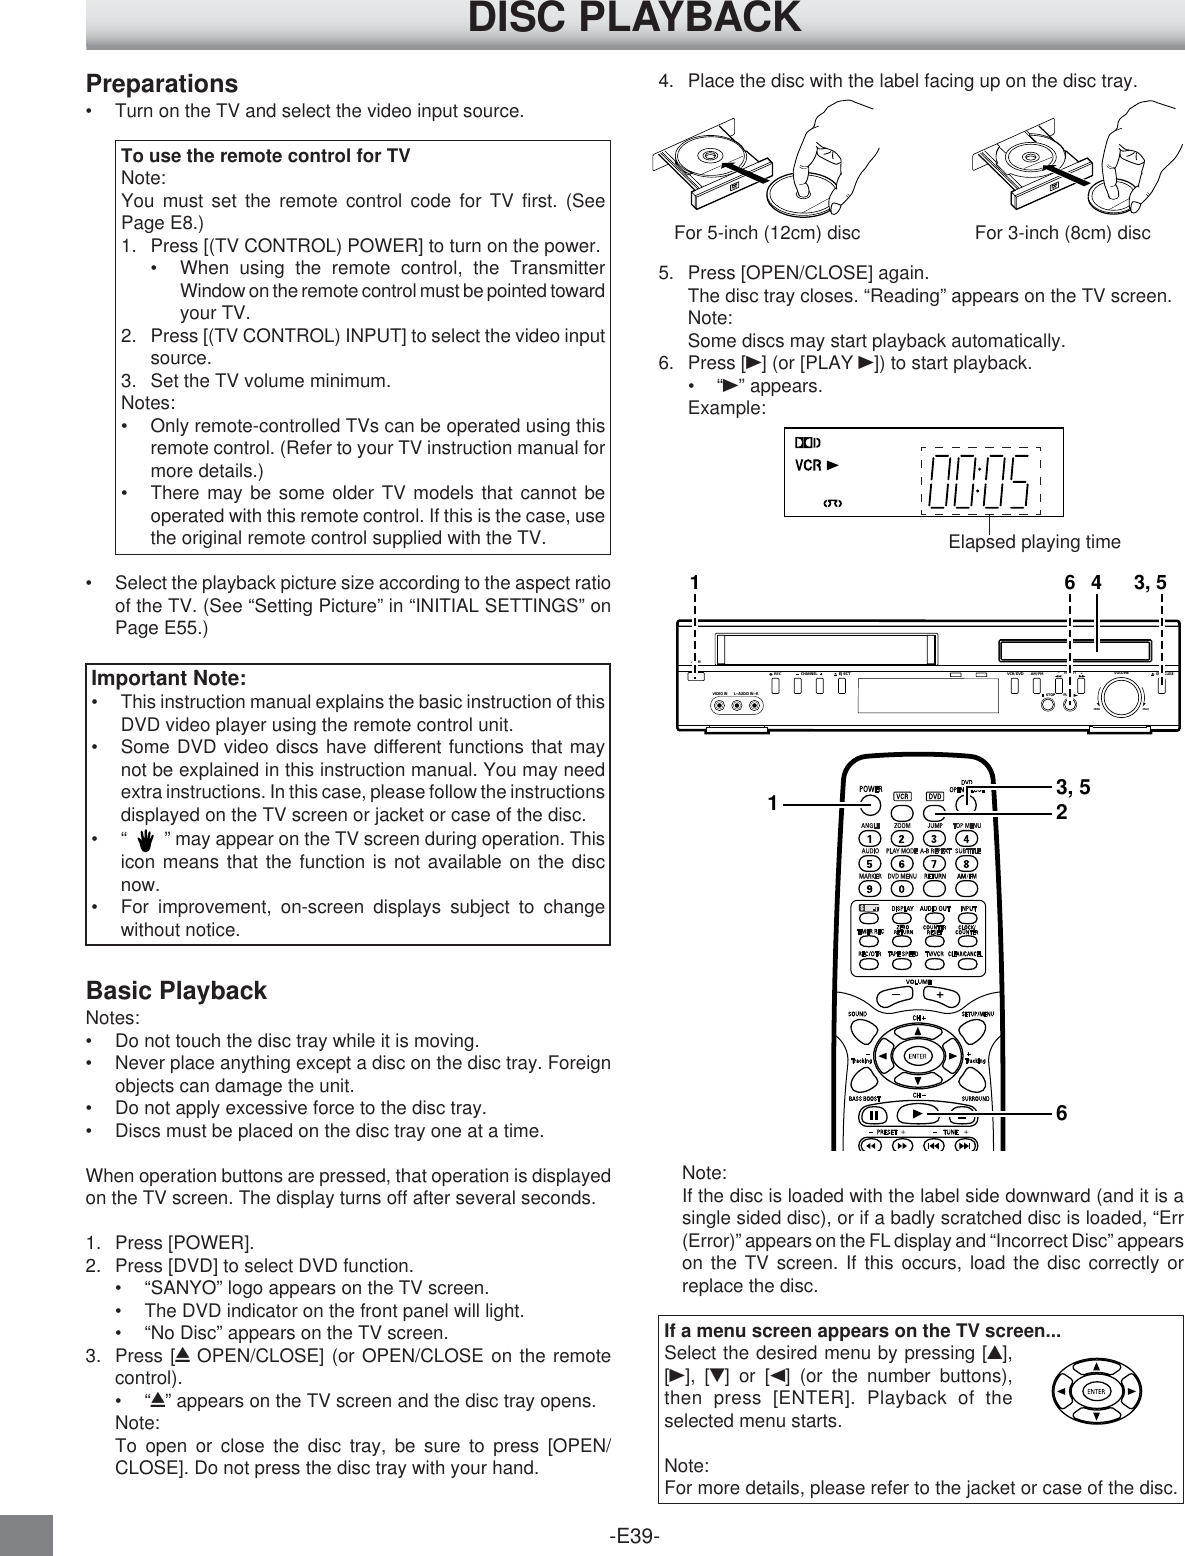 -E39-13, 526DISC PLAYBACKImportant Note:•This instruction manual explains the basic instruction of thisDVD video player using the remote control unit.•Some DVD video discs have different functions that maynot be explained in this instruction manual. You may needextra instructions. In this case, please follow the instructionsdisplayed on the TV screen or jacket or case of the disc.•“     ” may appear on the TV screen during operation. Thisicon means that the function is not available on the discnow.•For improvement, on-screen displays subject to changewithout notice.Preparations•Turn on the TV and select the video input source.To use the remote control for TVNote:You must set the remote control code for TV first. (SeePage E8.)1. Press [(TV CONTROL) POWER] to turn on the power.•When using the remote control, the TransmitterWindow on the remote control must be pointed towardyour TV.2. Press [(TV CONTROL) INPUT] to select the video inputsource.3. Set the TV volume minimum.Notes:•Only remote-controlled TVs can be operated using thisremote control. (Refer to your TV instruction manual formore details.)•There may be some older TV models that cannot beoperated with this remote control. If this is the case, usethe original remote control supplied with the TV.•Select the playback picture size according to the aspect ratioof the TV. (See “Setting Picture” in “INITIAL SETTINGS” onPage E55.)Basic PlaybackNotes:•Do not touch the disc tray while it is moving.•Never place anything except a disc on the disc tray. Foreignobjects can damage the unit.•Do not apply excessive force to the disc tray.•Discs must be placed on the disc tray one at a time.When operation buttons are pressed, that operation is displayedon the TV screen. The display turns off after several seconds.1. Press [POWER].2. Press [DVD] to select DVD function.•“SANYO” logo appears on the TV screen.•The DVD indicator on the front panel will light.•“No Disc” appears on the TV screen.3. Press [q OPEN/CLOSE] (or OPEN/CLOSE on the remotecontrol).•“q” appears on the TV screen and the disc tray opens.Note:To open or close the disc tray, be sure to press [OPEN/CLOSE]. Do not press the disc tray with your hand.Note:If the disc is loaded with the label side downward (and it is asingle sided disc), or if a badly scratched disc is loaded, “Err(Error)” appears on the FL display and “Incorrect Disc” appearson the TV screen. If this occurs, load the disc correctly orreplace the disc.If a menu screen appears on the TV screen...Select the desired menu by pressing [4],[a], [5] or [b] (or the number buttons),then press [ENTER]. Playback of theselected menu starts.Note:For more details, please refer to the jacket or case of the disc.For 5-inch (12cm) disc For 3-inch (8cm) discVIDEO IN L-AUDIO IN-R/ONVOLUMEMINIMAXEJECTRECCHANNELAM/FMVCR/DVDPRESET+-OPEN/CLOSESTOP PLAY1 6 4 3, 54. Place the disc with the label facing up on the disc tray.5. Press [OPEN/CLOSE] again.The disc tray closes. “Reading” appears on the TV screen.Note:Some discs may start playback automatically.6. Press [a] (or [PLAY a]) to start playback.•“a” appears.Example:Elapsed playing time